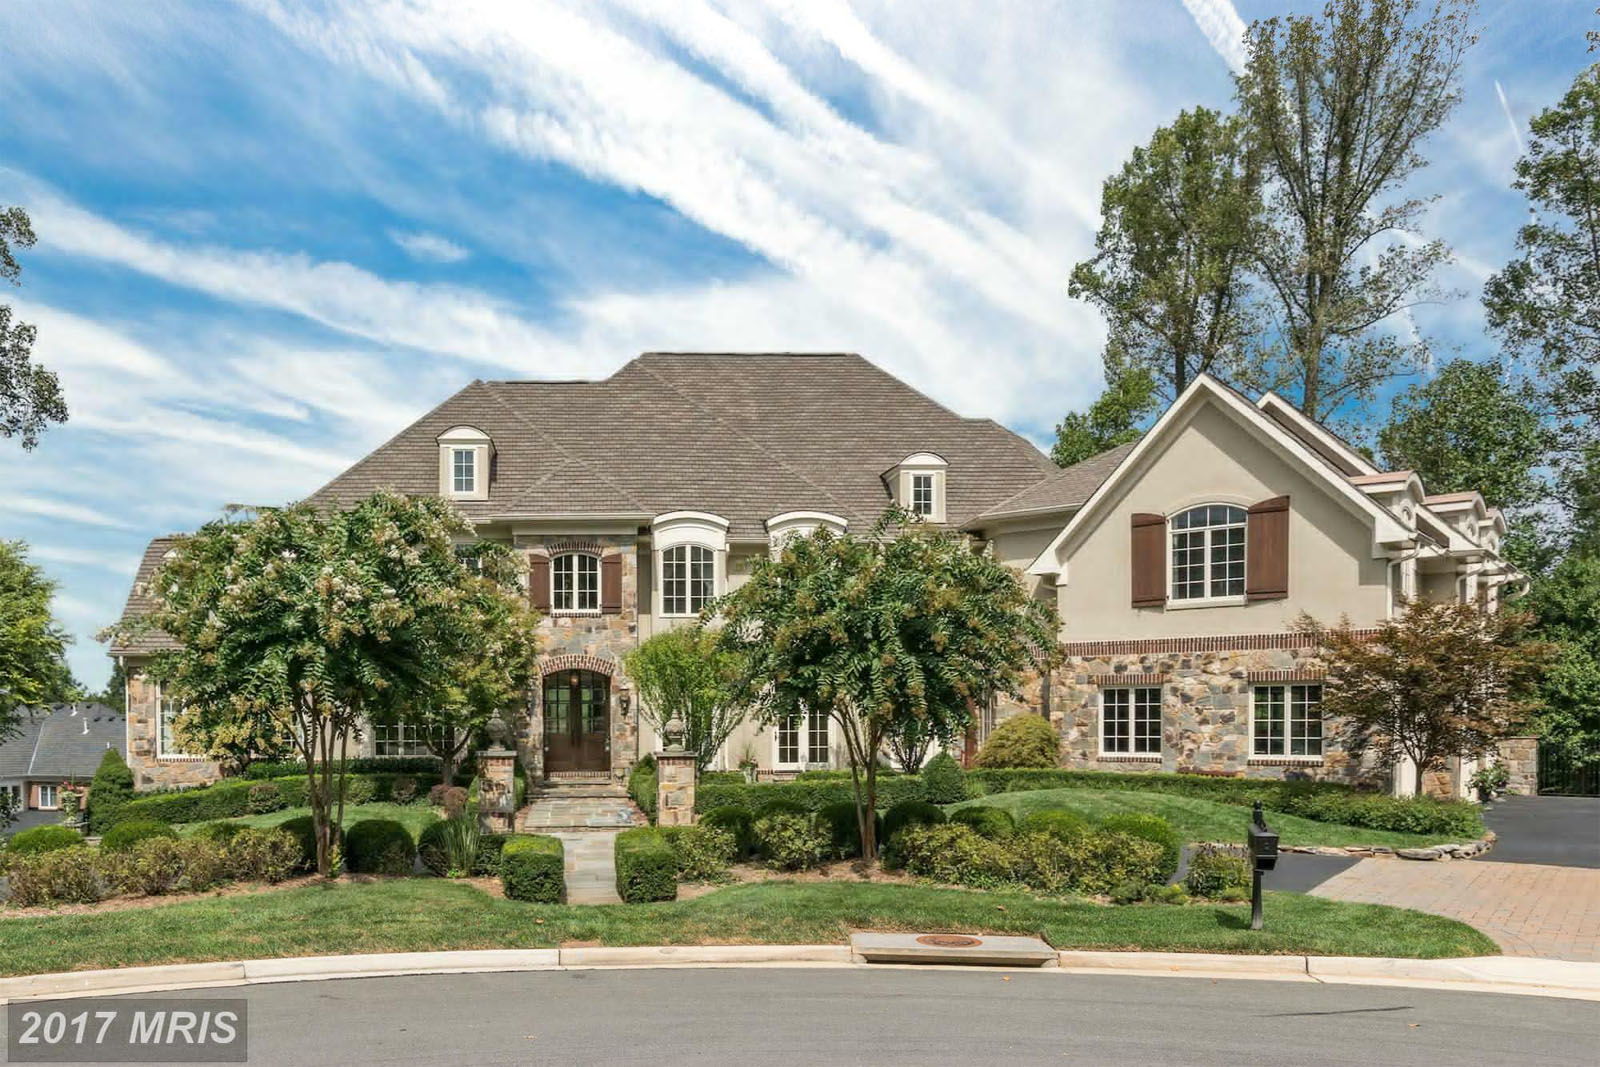 6. $3,500,000



7800 Meritage Lane

McLean, Virginia



The French Country home in Mclean, was built in 2006 and has seven bedrooms, six bathrooms and two half-baths. (Courtesy MRIS, a Bright MLS)